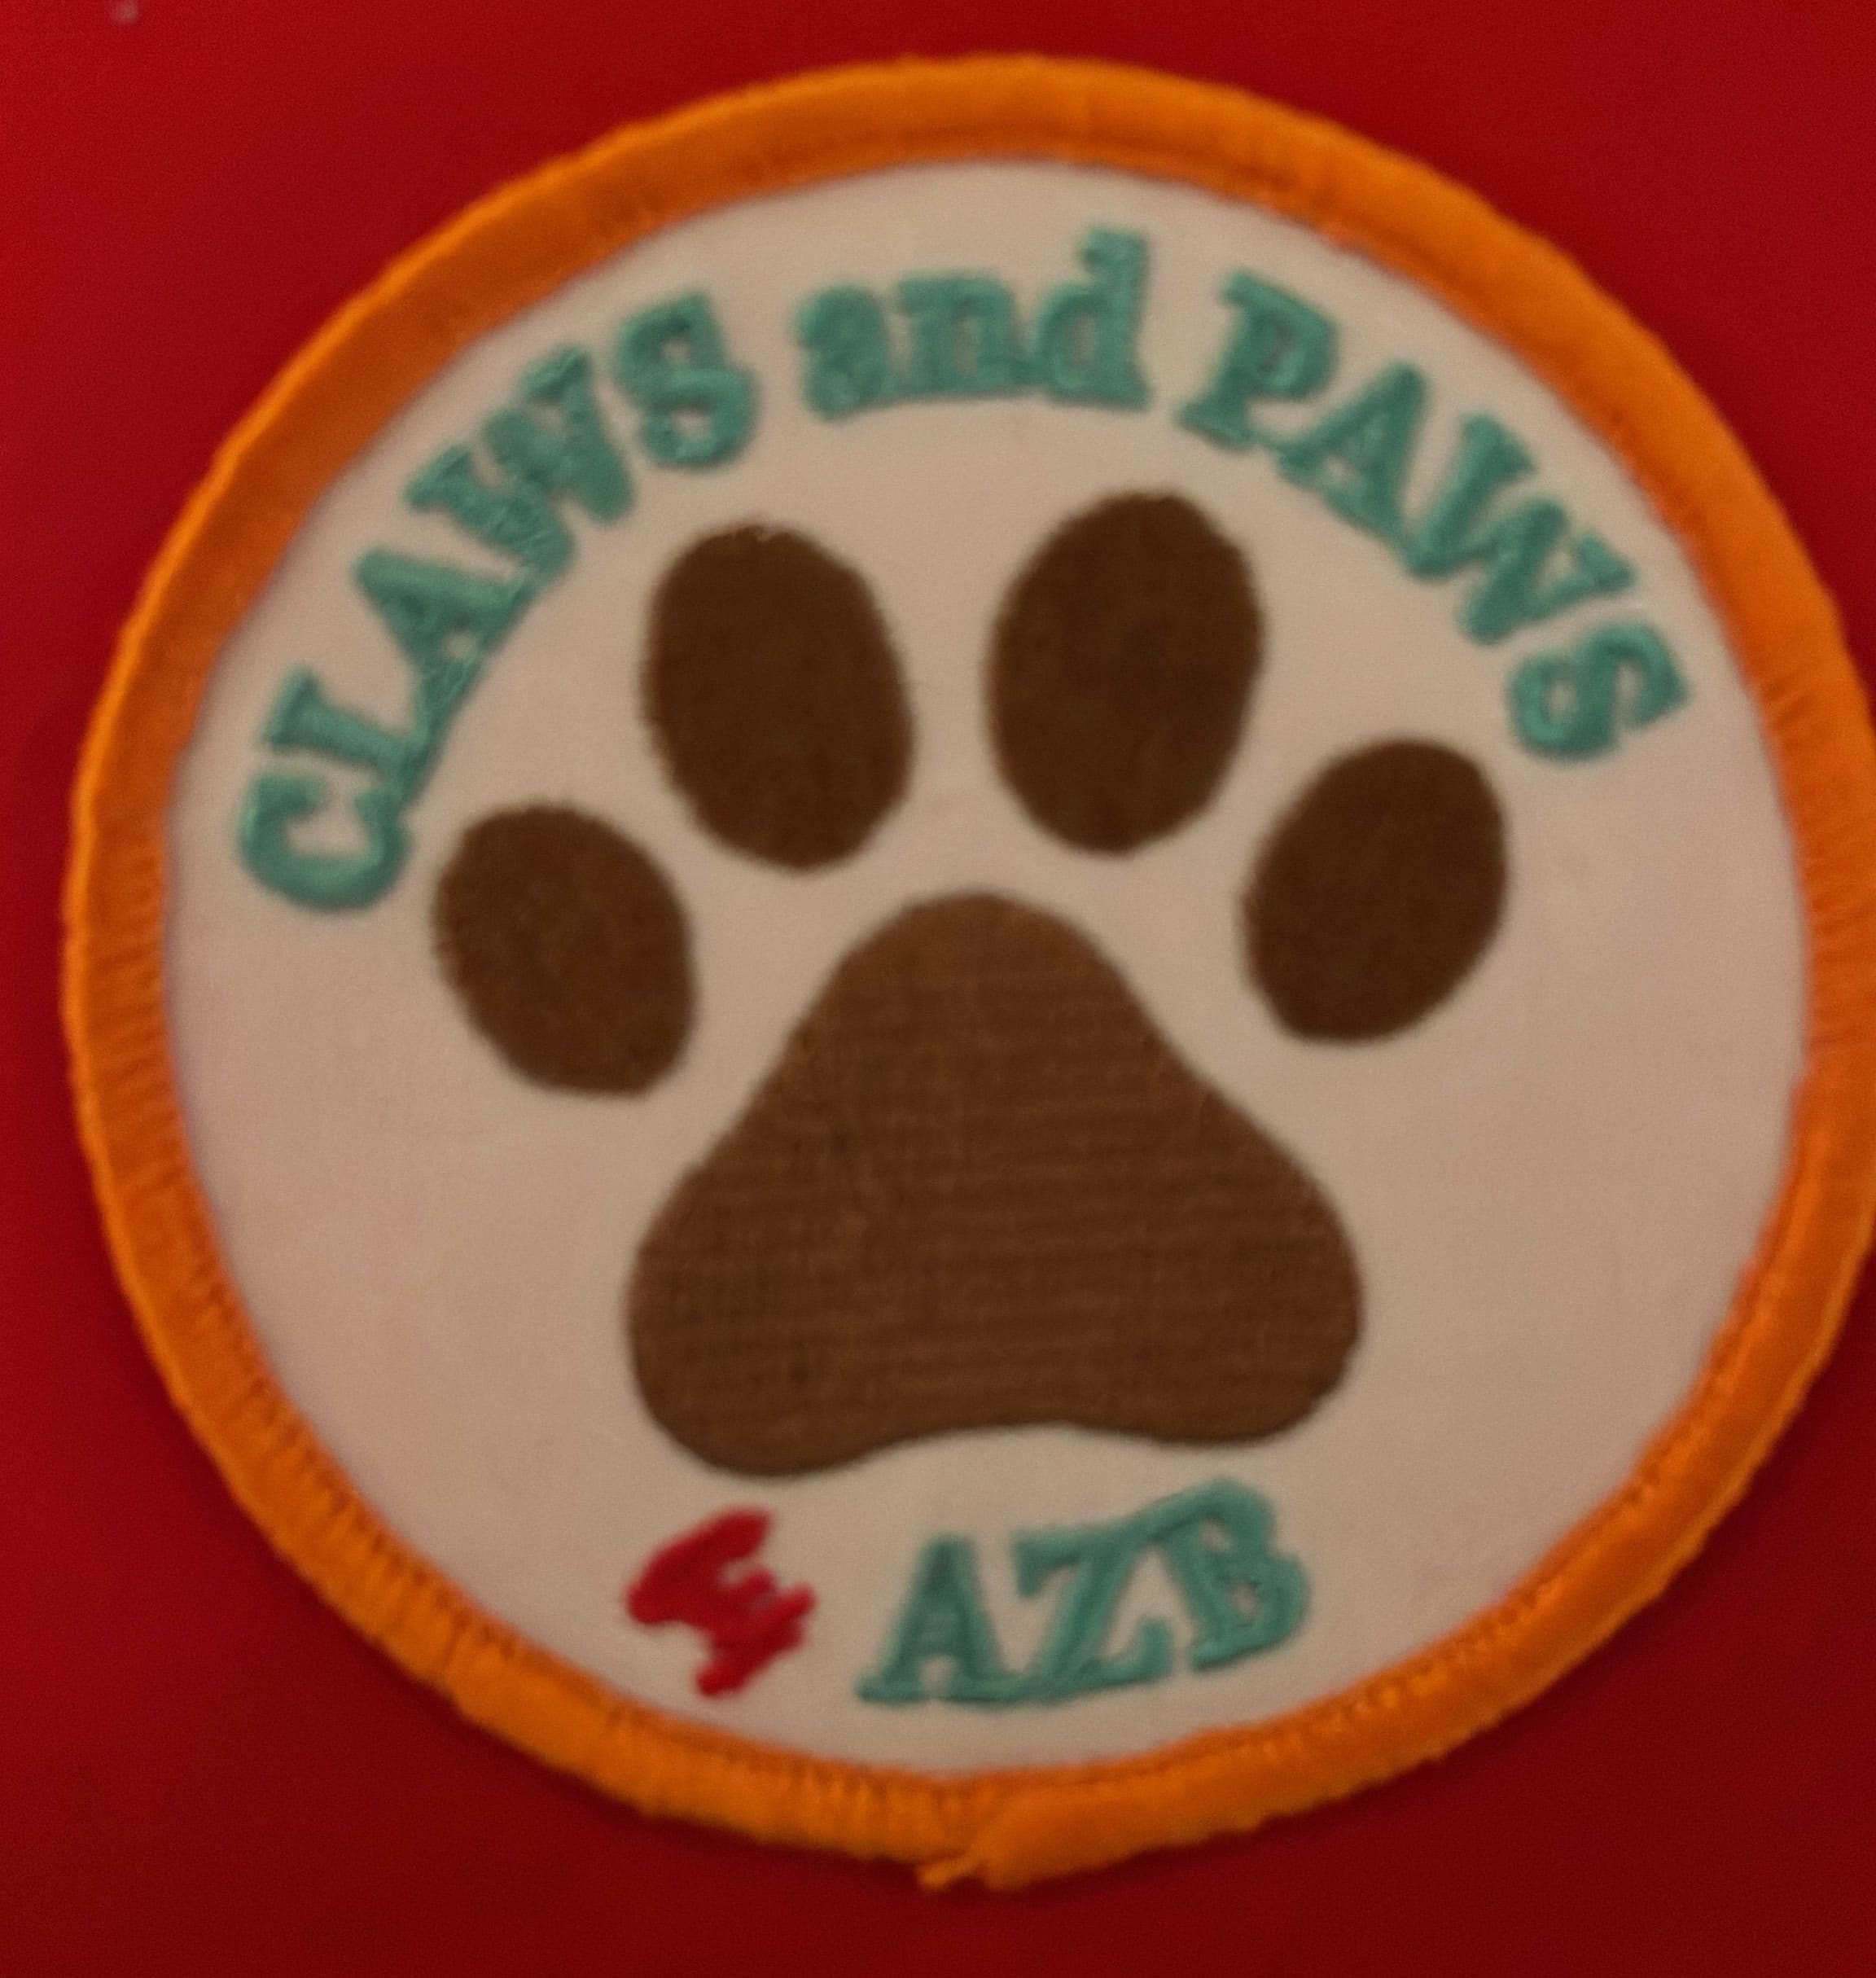 Claws and Paws by AZB